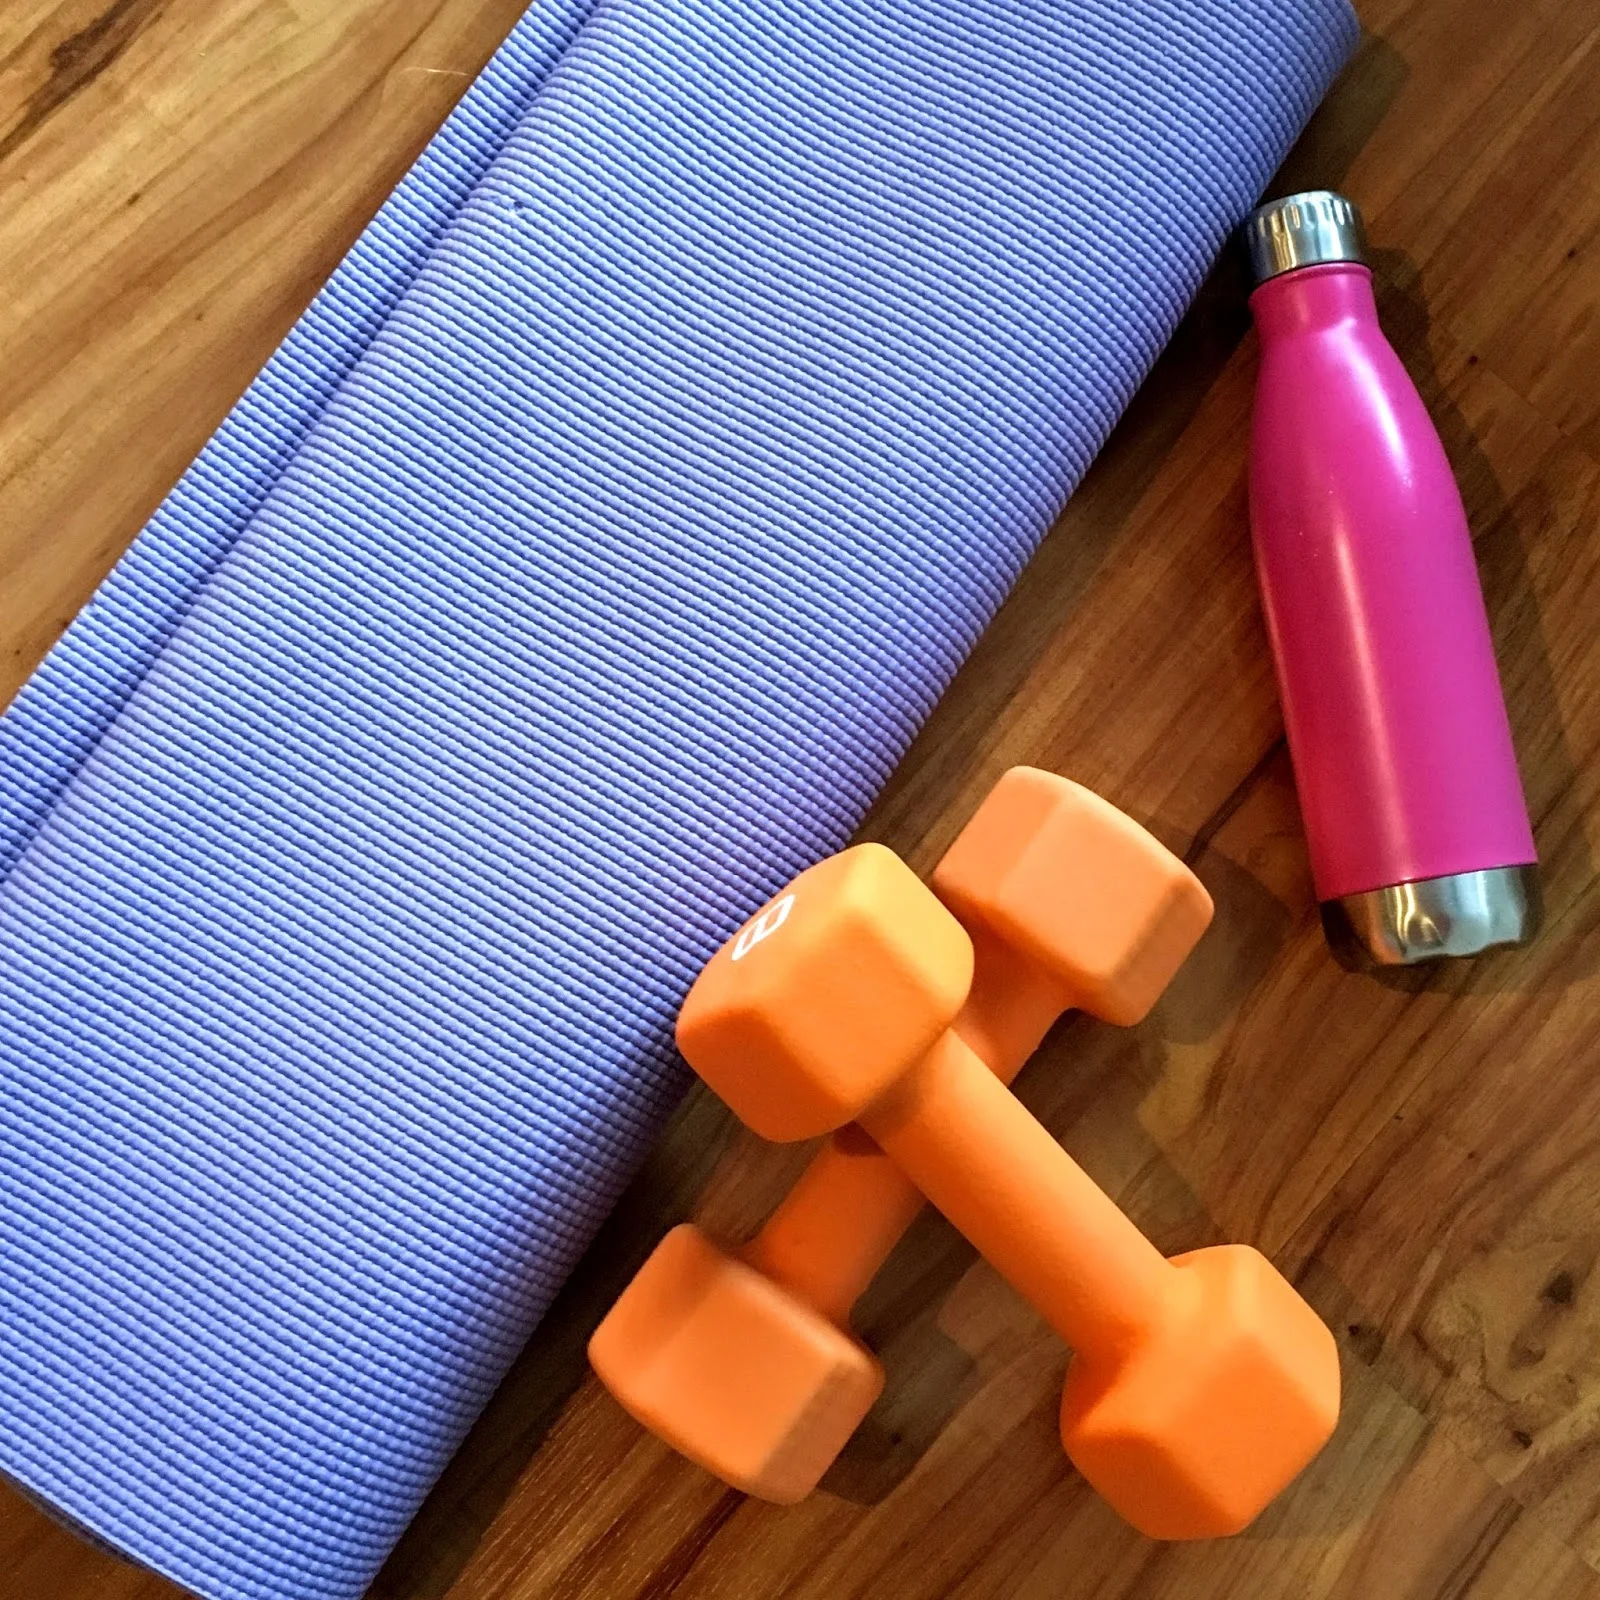 5 Ways to Workout from Home with little or no equipment www.livingyoungandhealthy.com #homeworkout #homefitness #dumbbells #fitnessapps